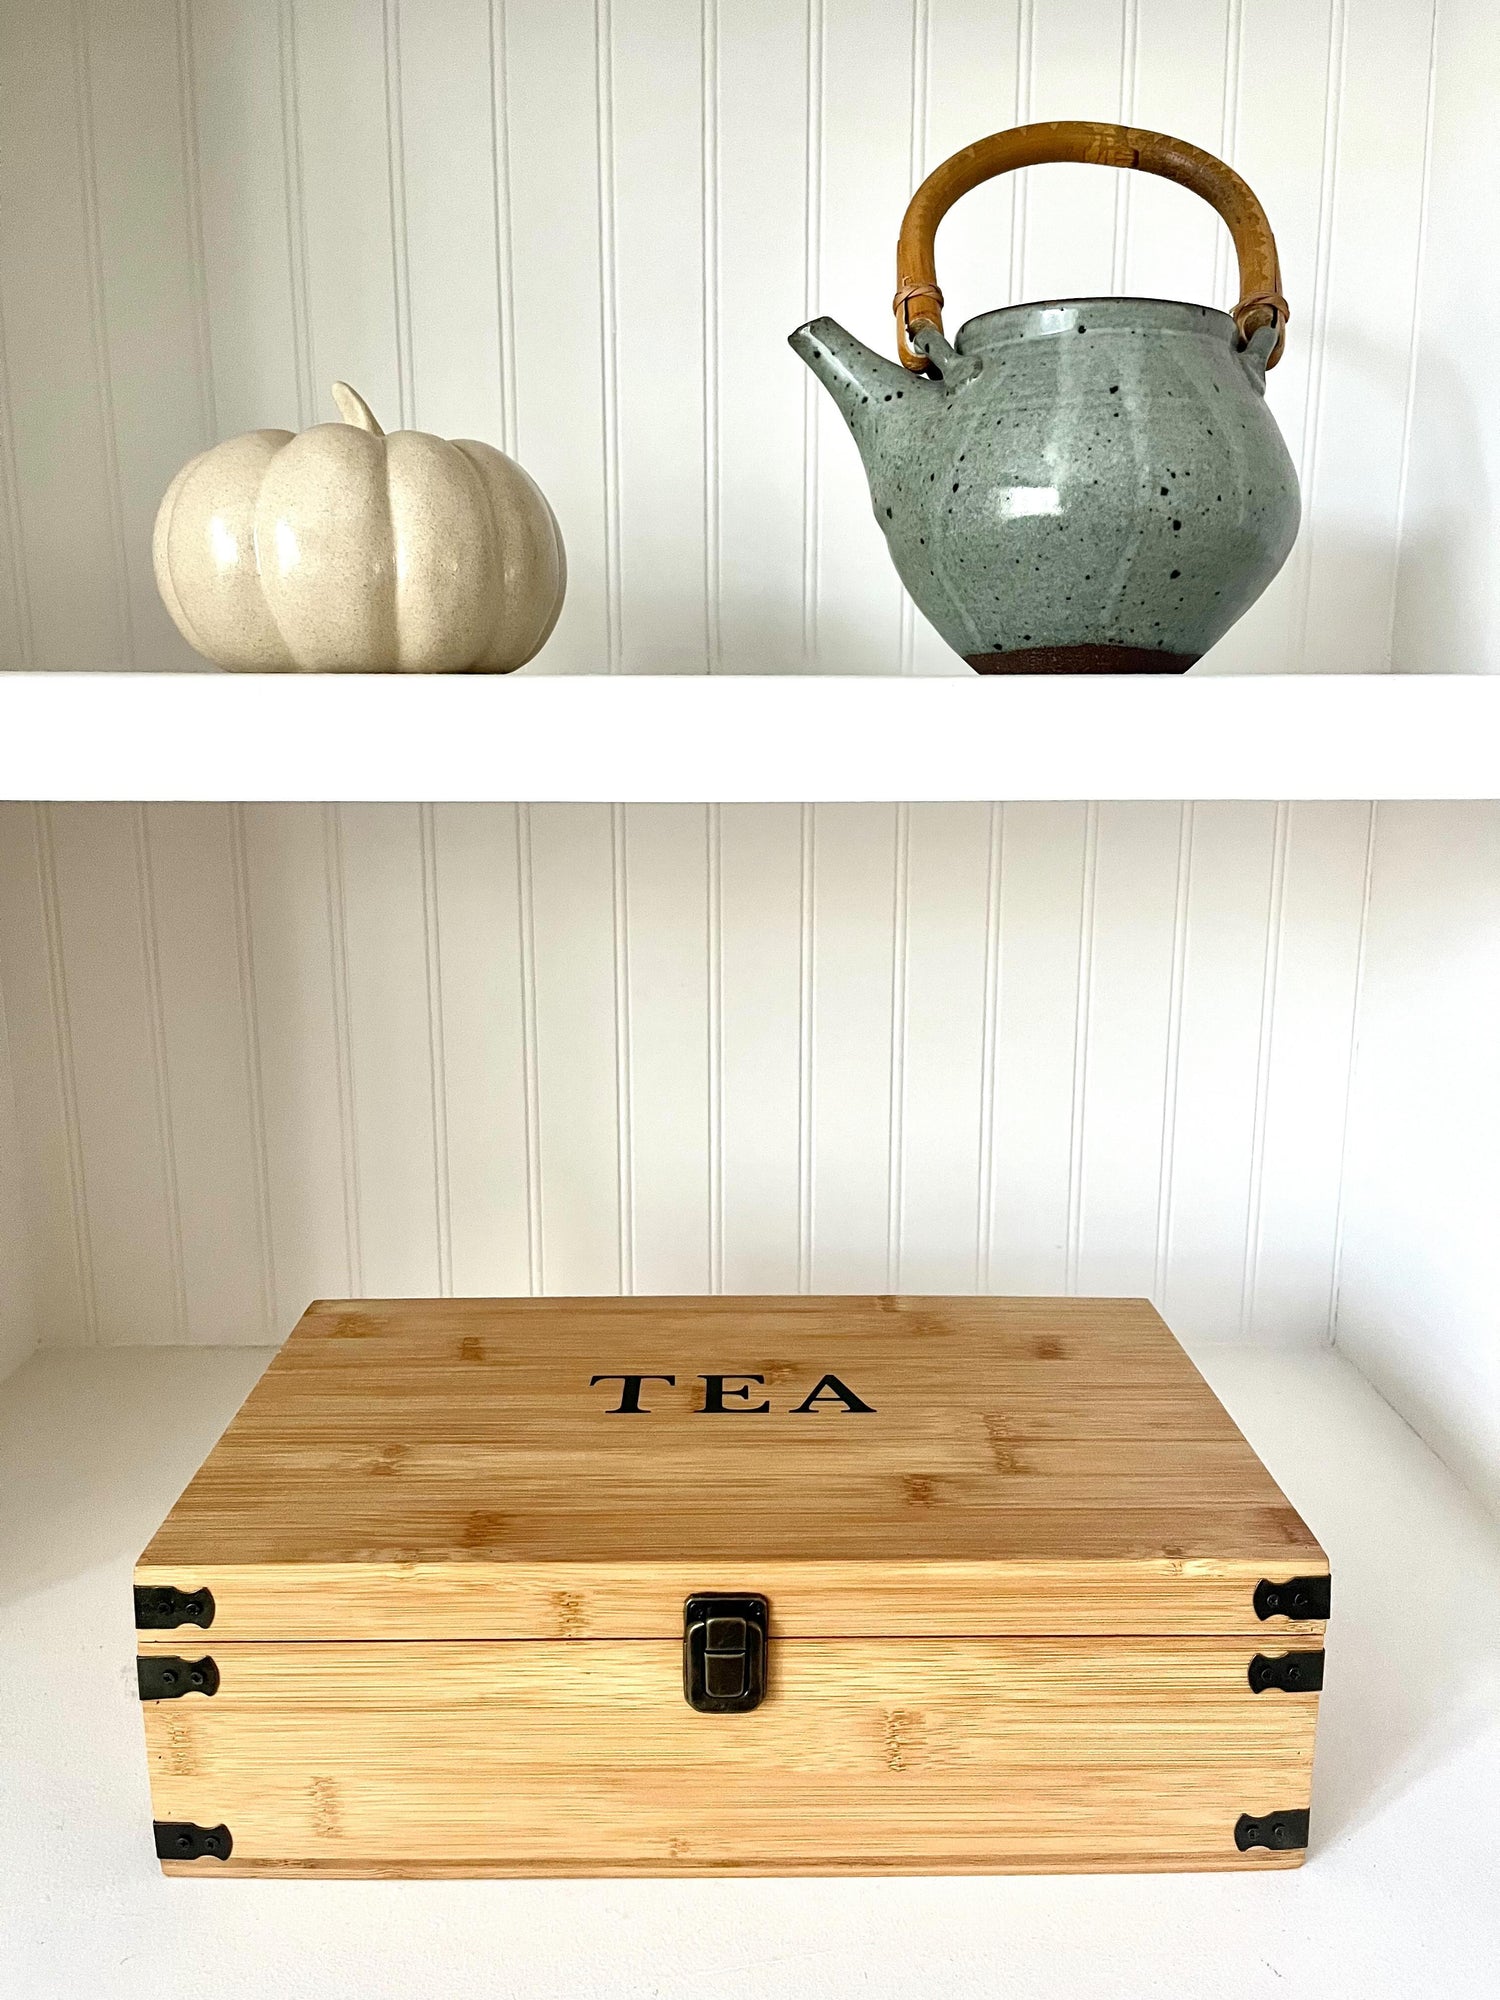 6-Slot Bamboo Tea Organizer Box, Countertop Storage Chest with 4 Adjustable  Slot Compartments - Eco-Friendly Chemical Free Lacquer Finish